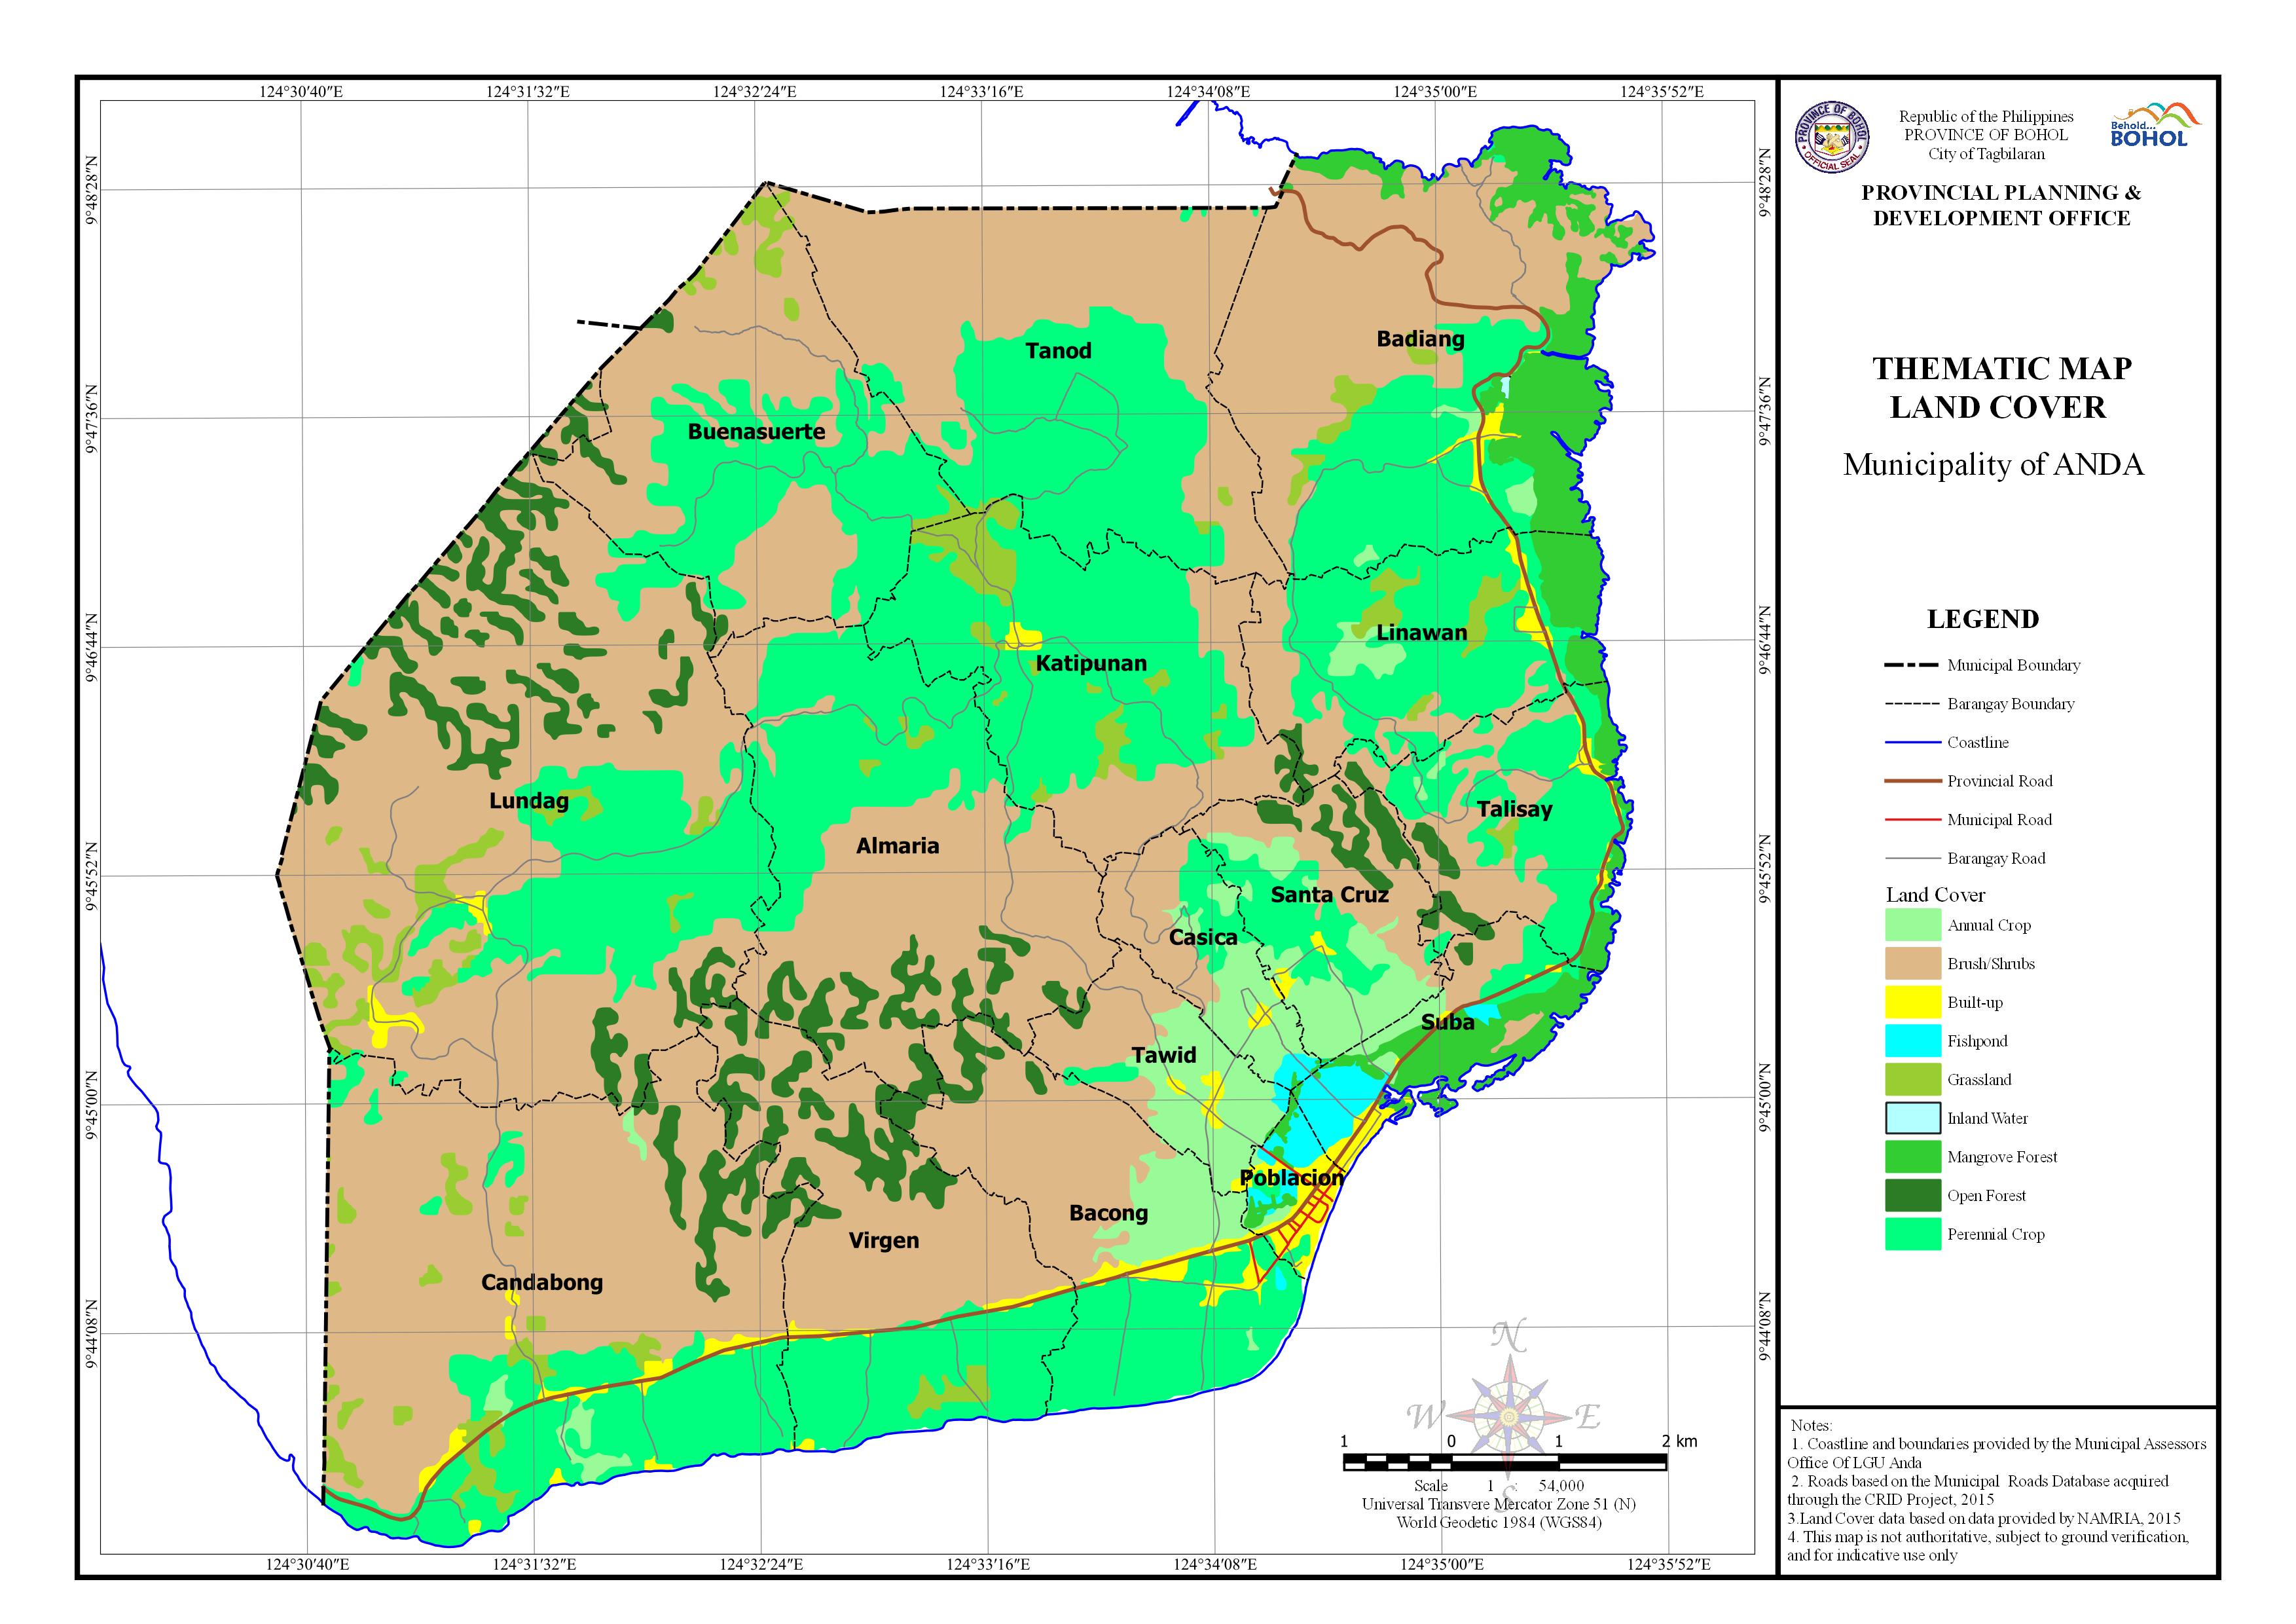 Land Cover